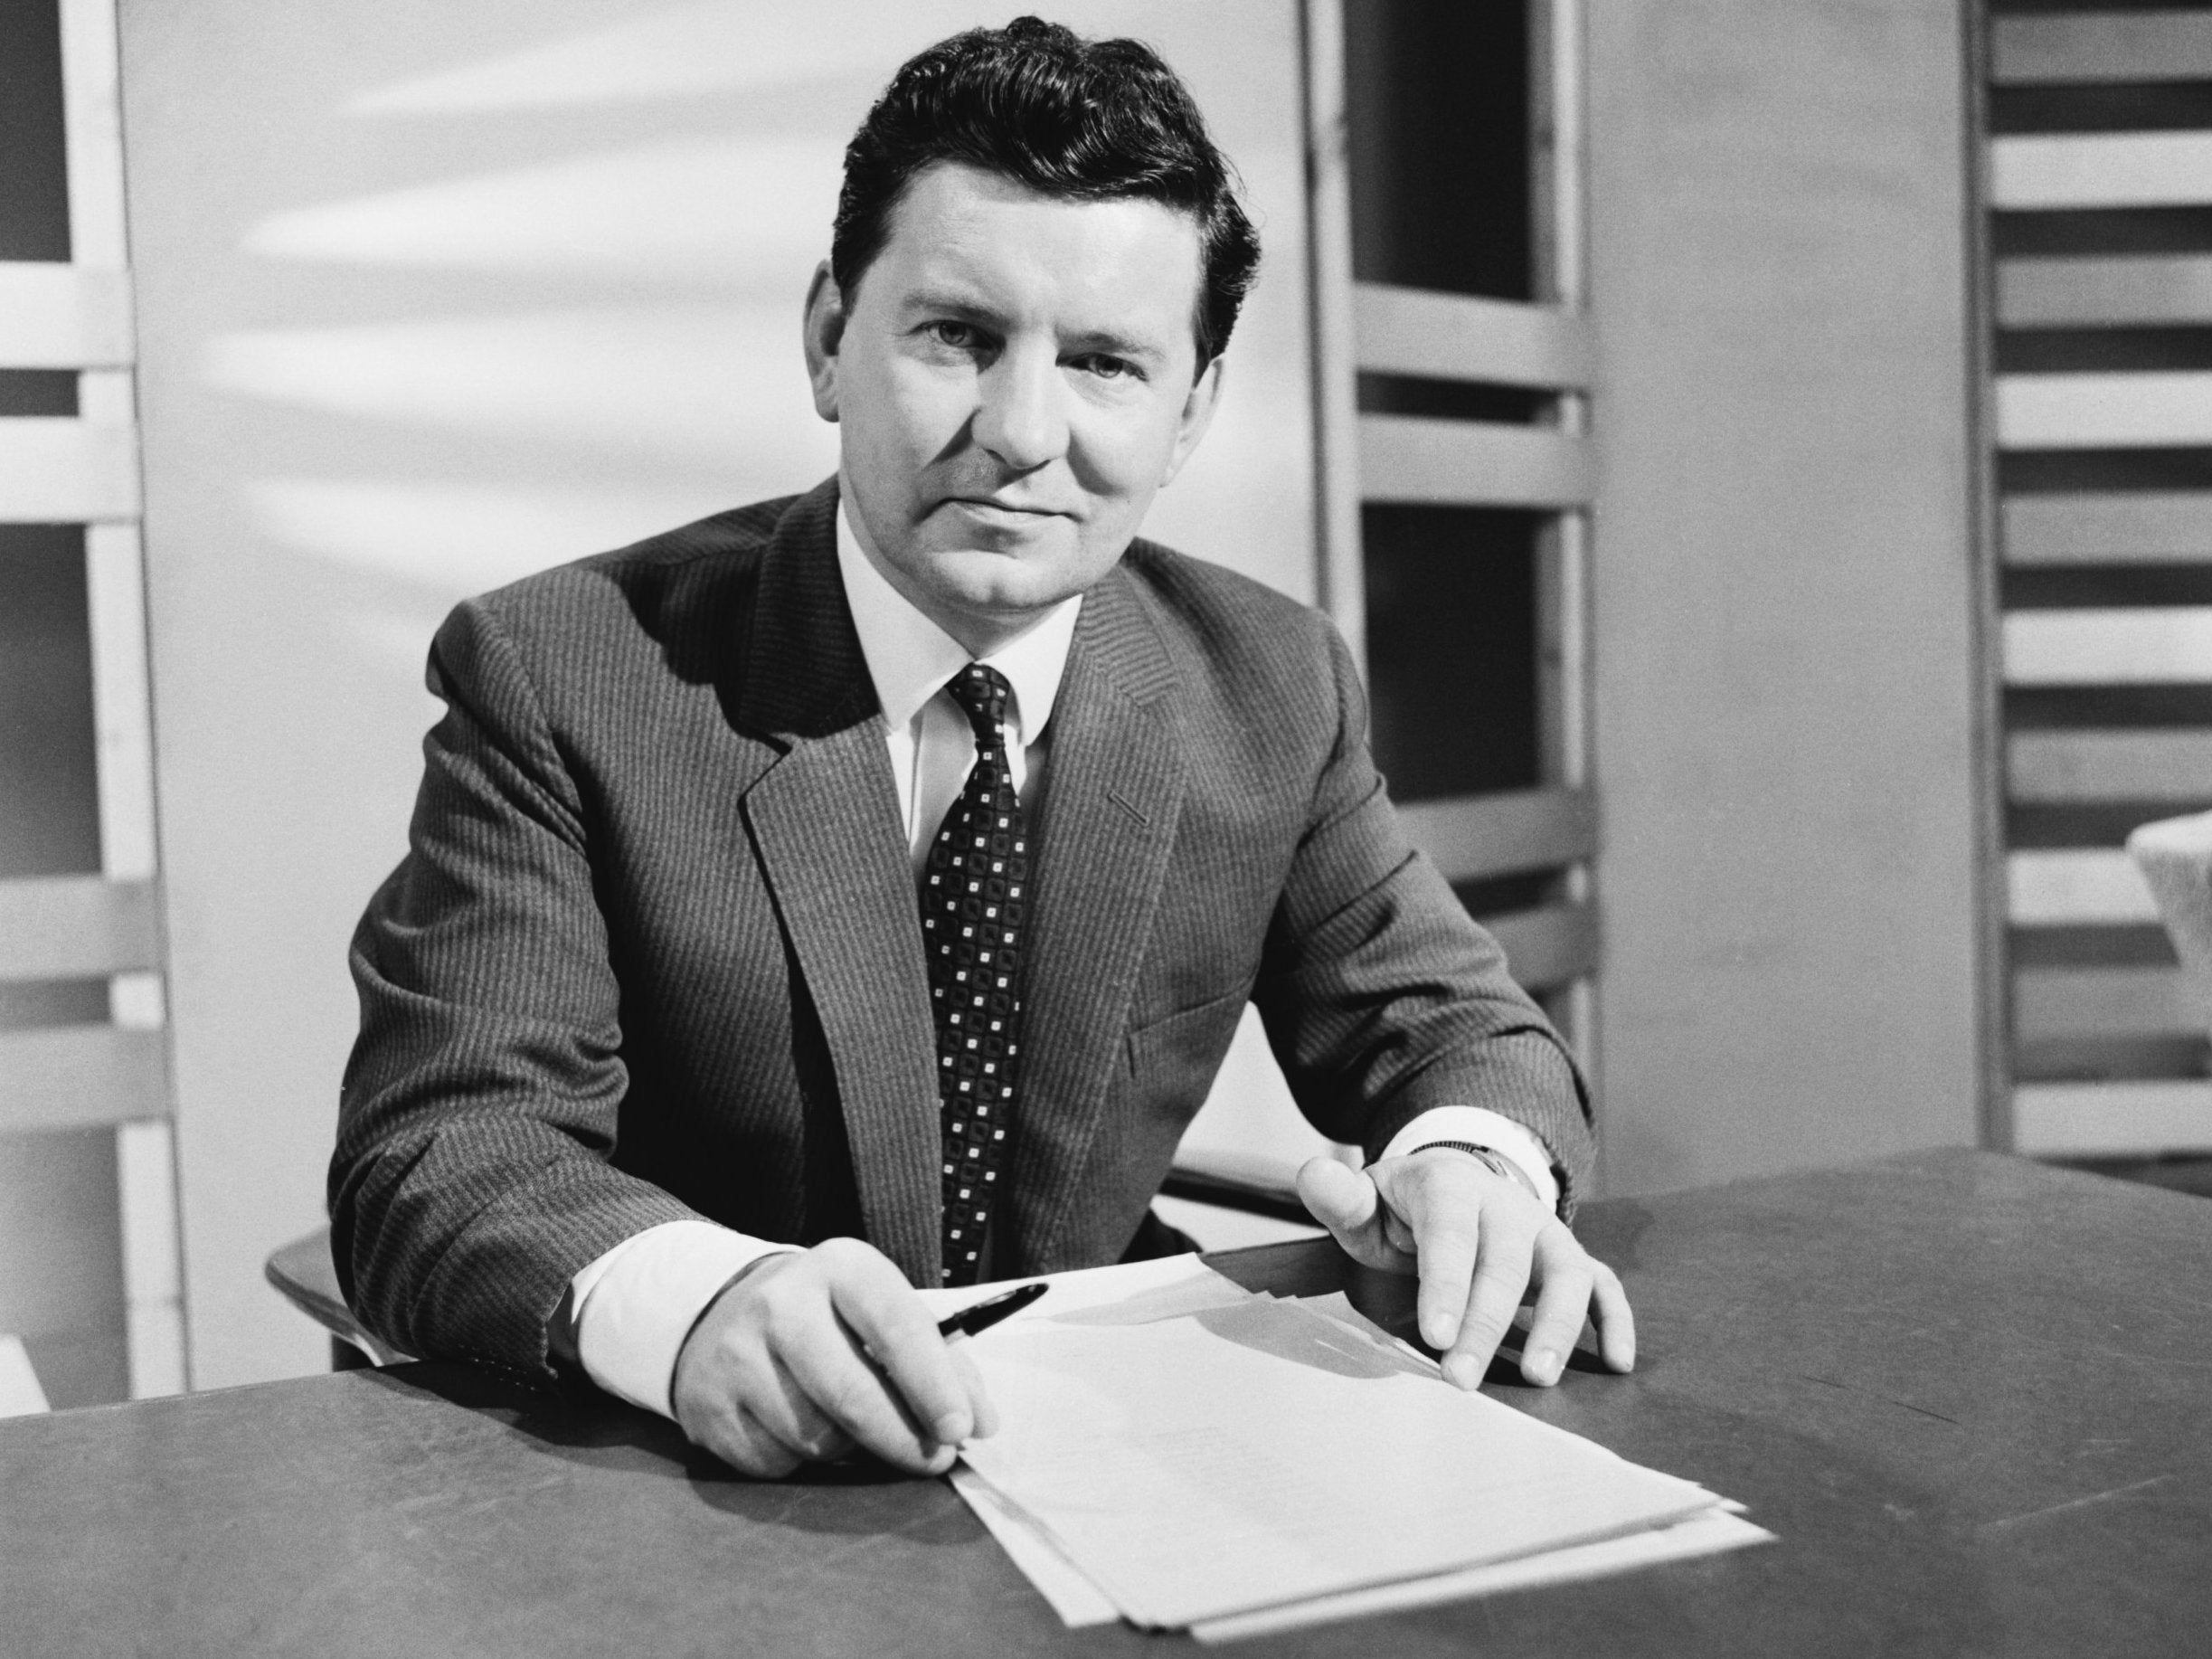 He first made his mark as one of the two original faces of BBC News – a role he took up in 1954 and maintained for 28 years